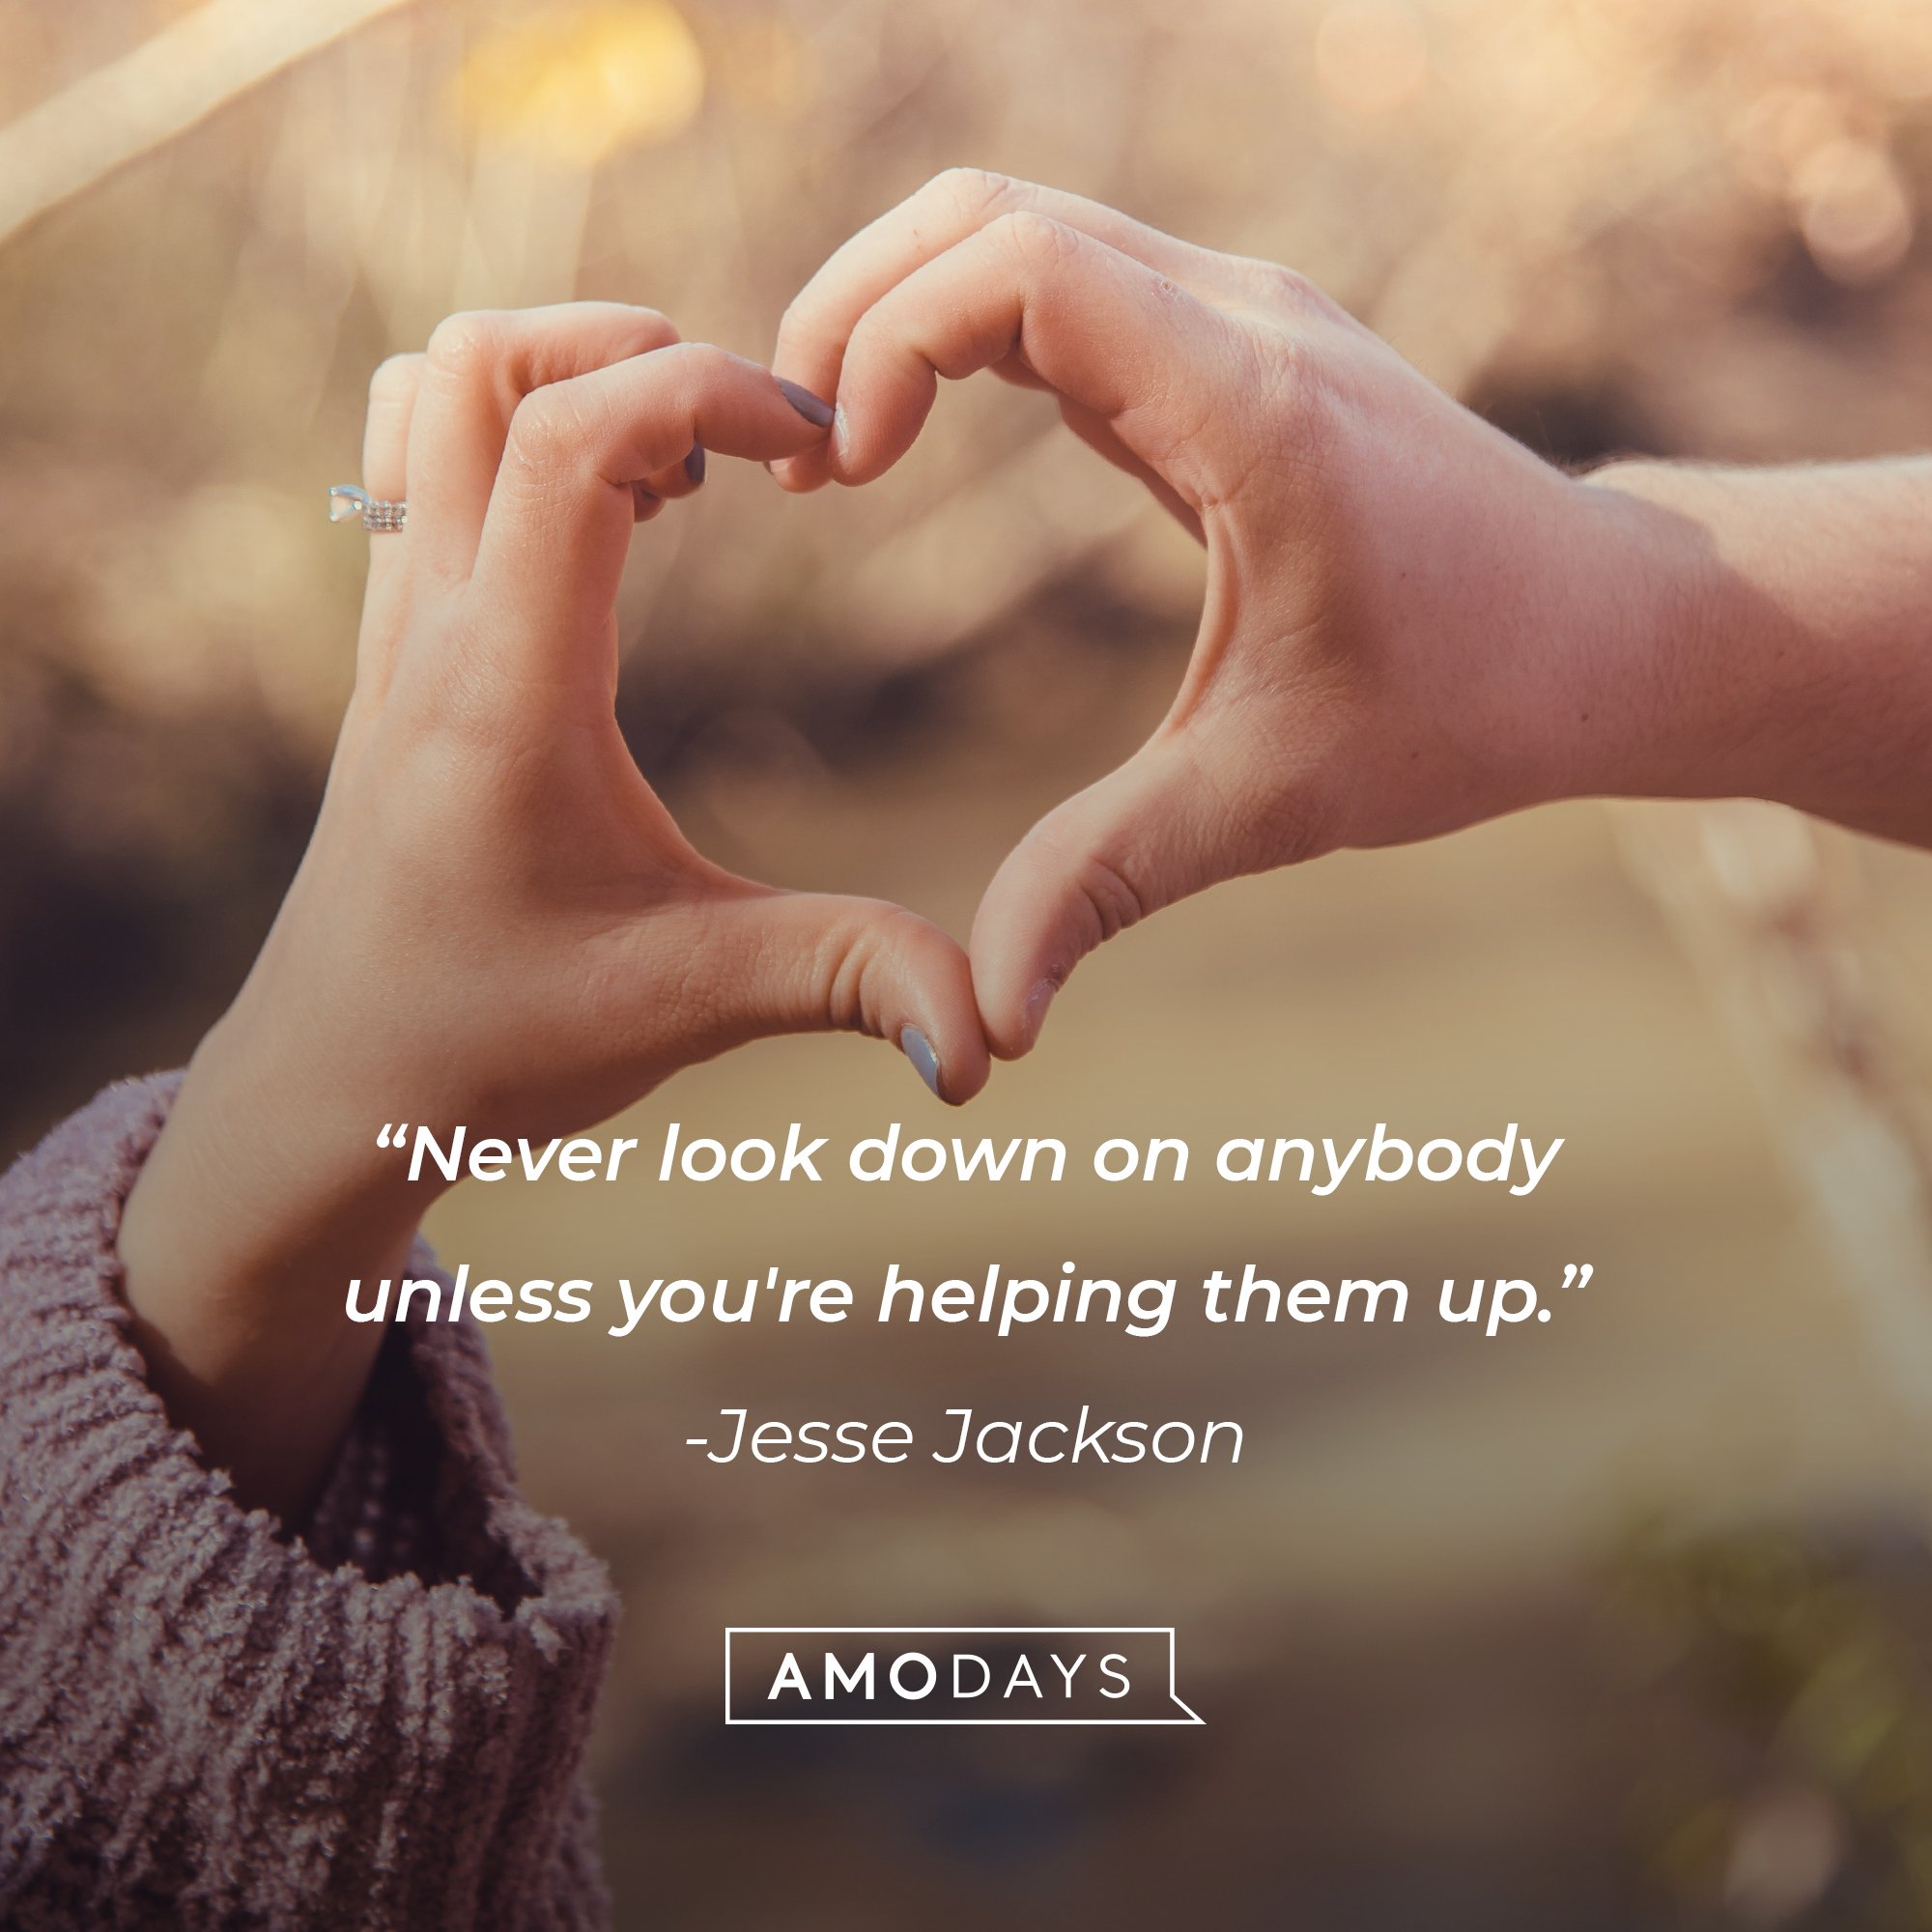 Jesse Jackson's quote: "Never look down on anybody unless you're helping them up." | Image: AmoDays